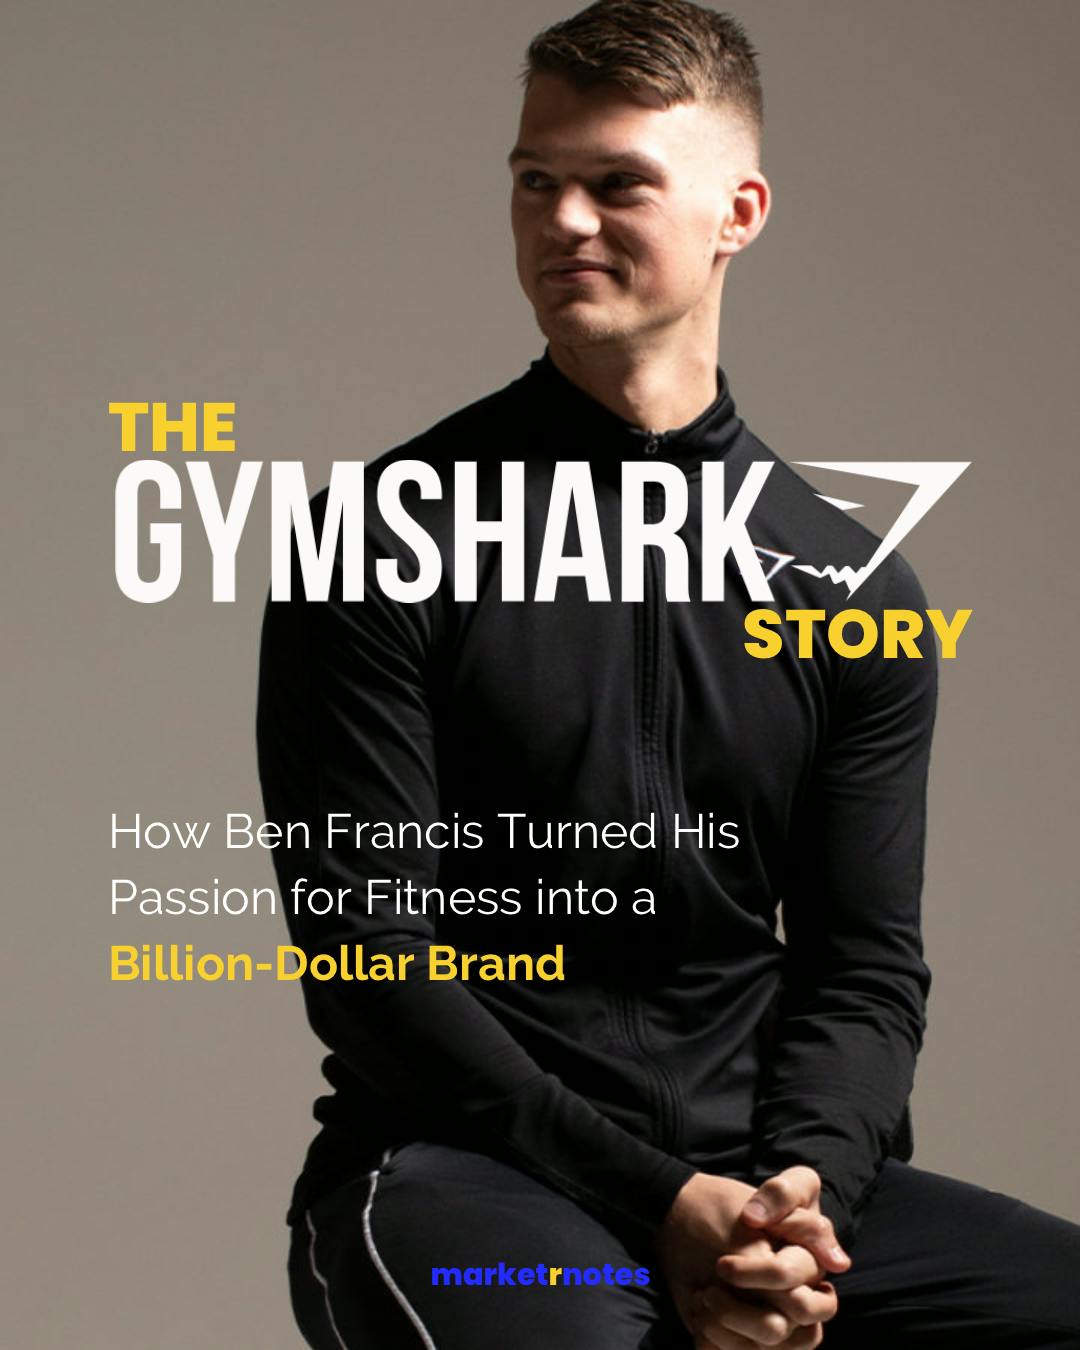 How Ben Francis Turned His Passions for Fitness into a Billion-Dollar Brand.